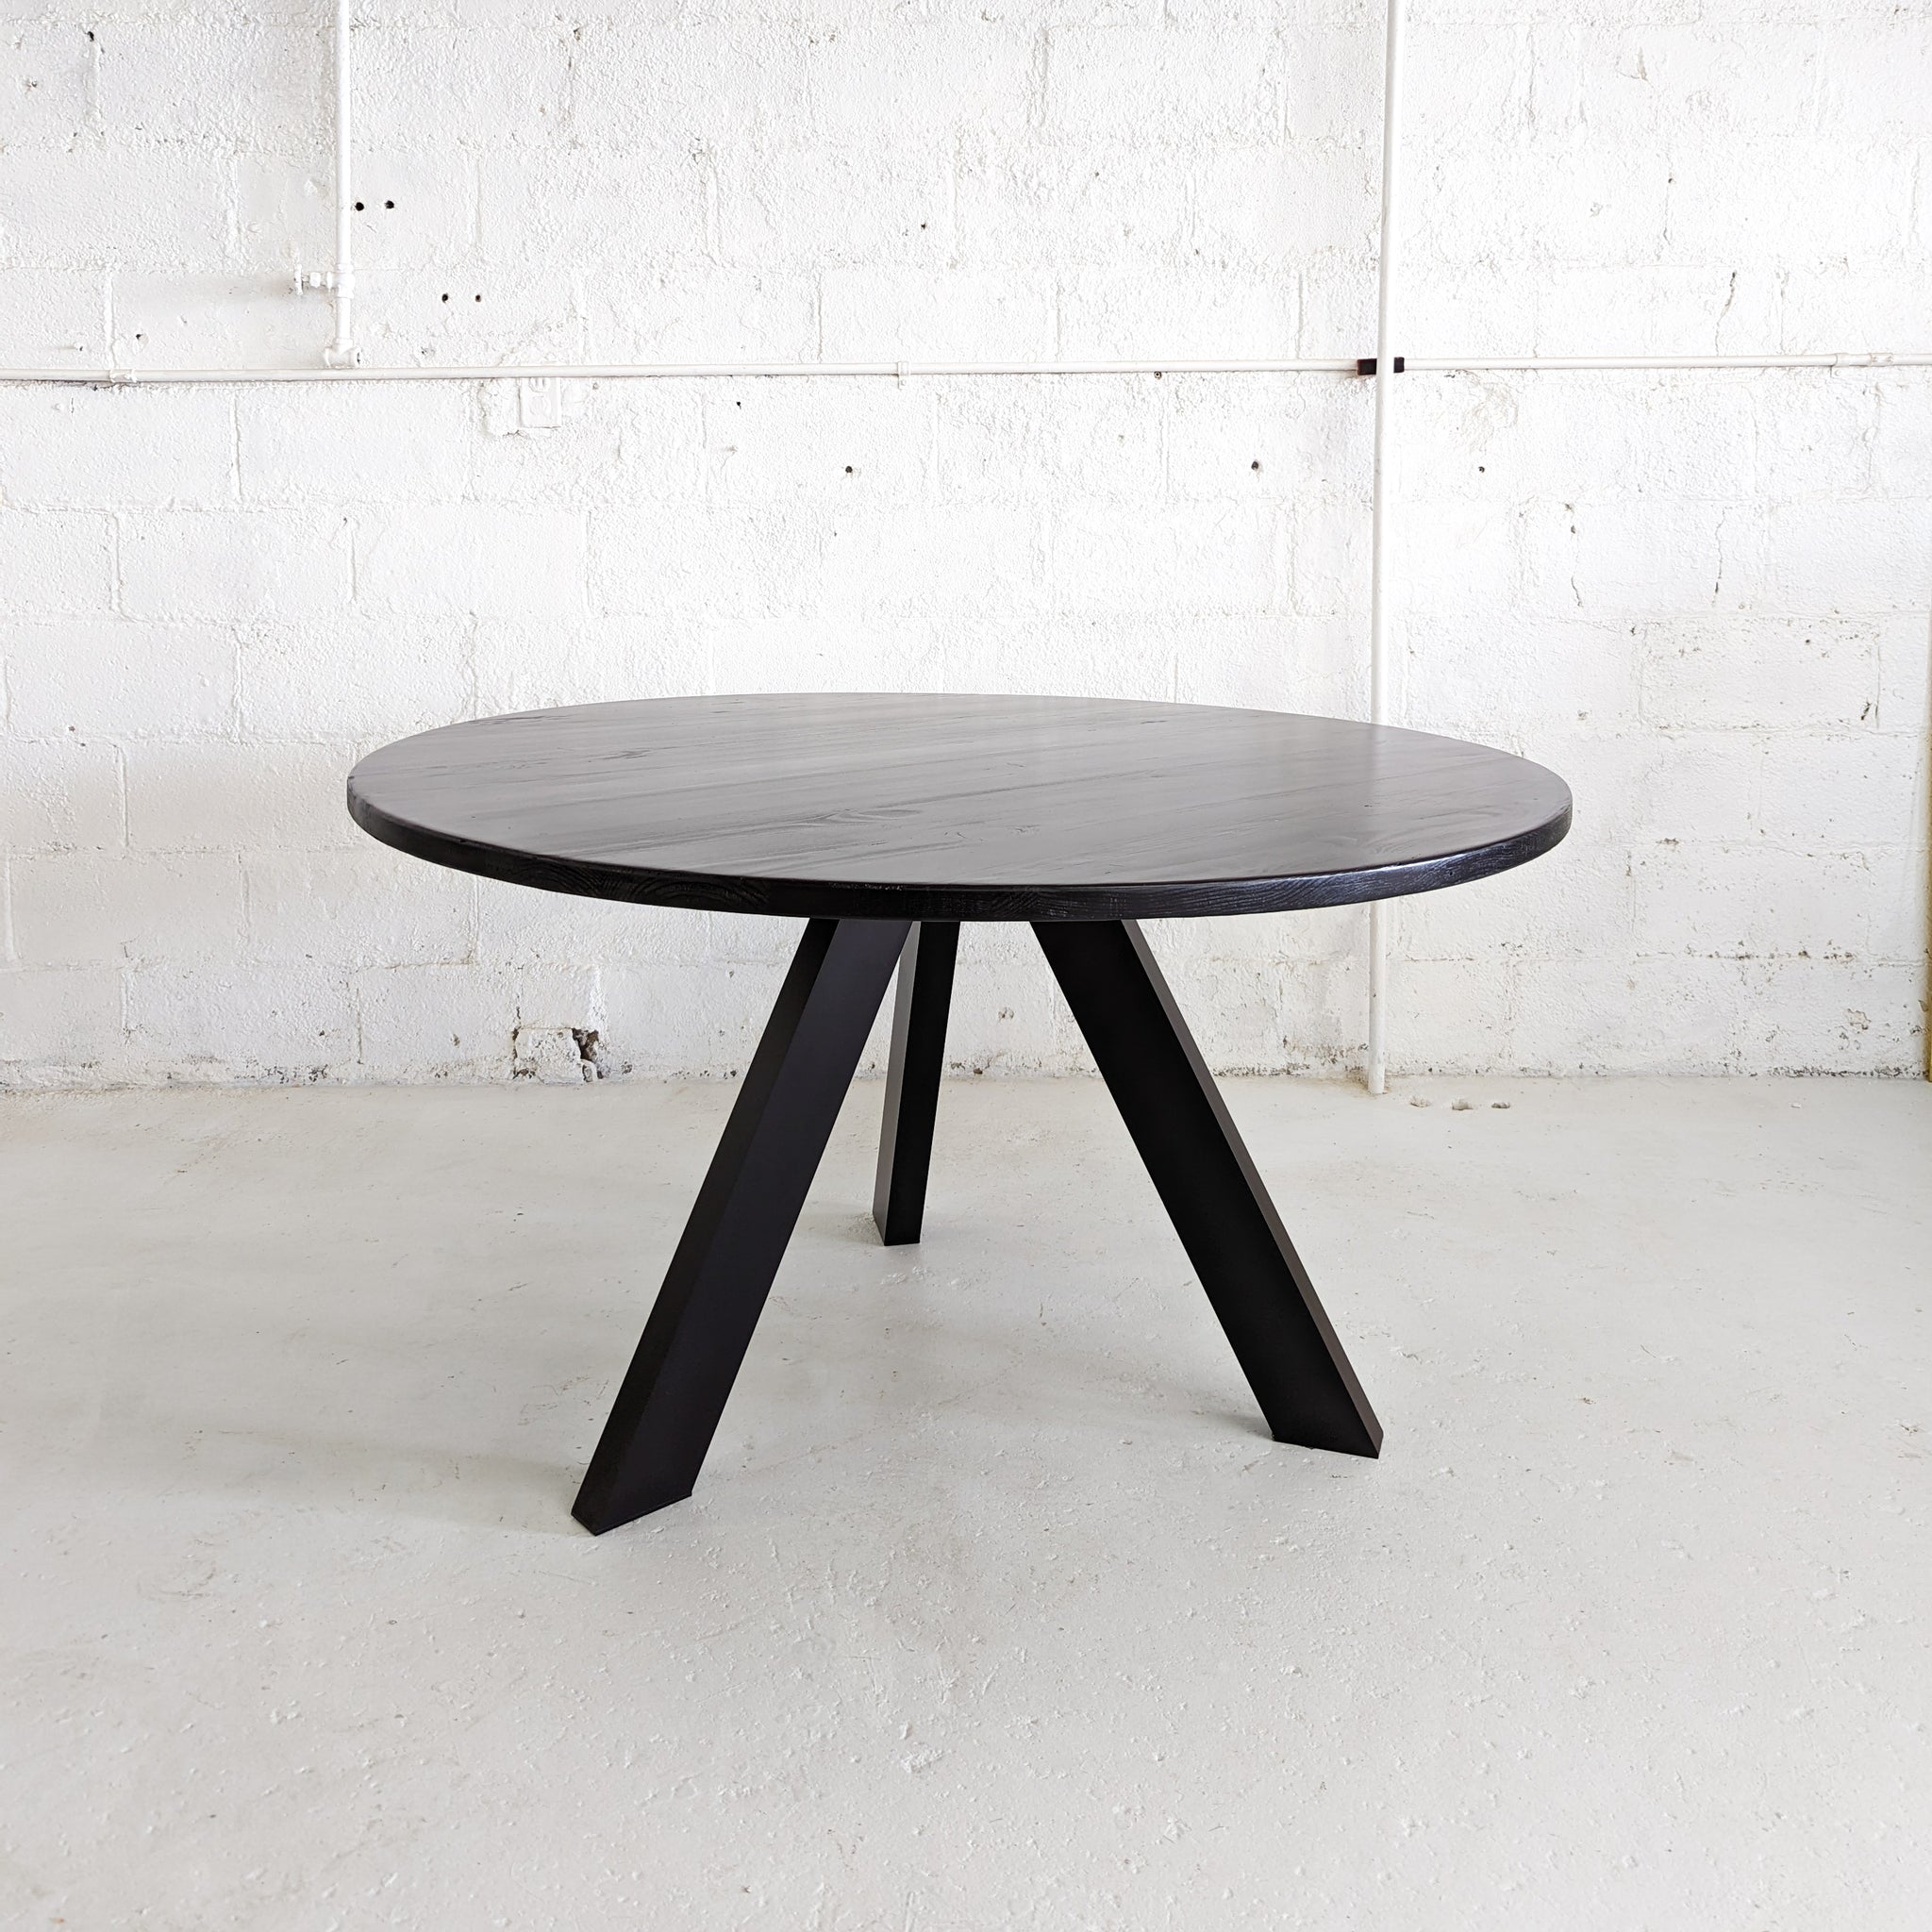 Round Timber Table